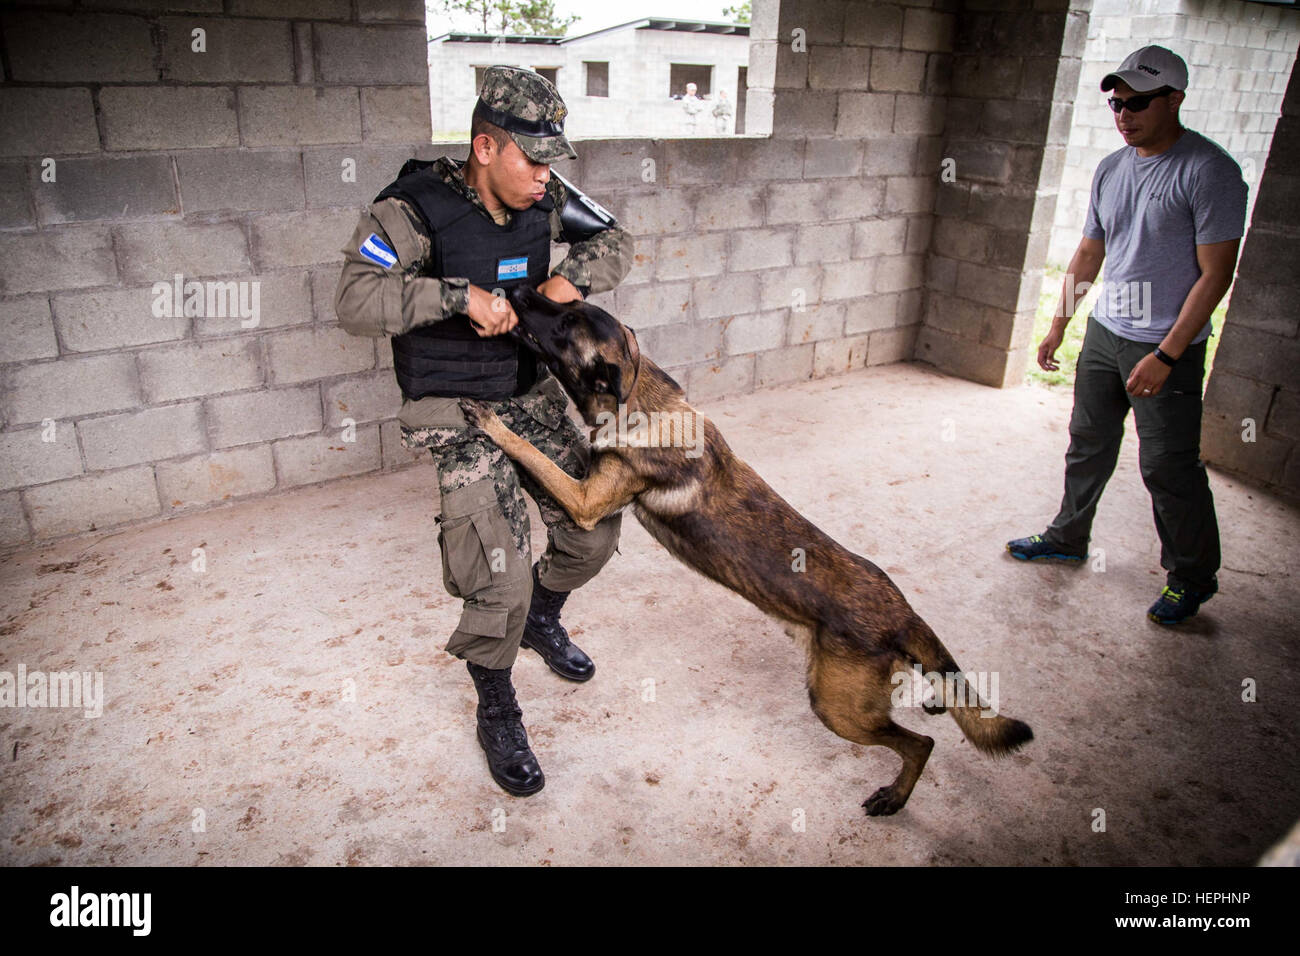 Spc. Rolando Rojas (right) observes as a Honduran soldier trains with his working dog.  Rojas is with the San Antonio-based 1st Battalion, 141st Infantry Regiment, which is conducting the training to enhance the Honduran Army’s ability to counter transnational organized crime (CTOC). 36th Infantry Division Soldiers of the Texas Army National Guard are spending four months in Central America creating a knowledgeable and trained force that is able to detect, disrupt and detain illicit trafficking across the region. (U.S. Army photo by Maj. Randall Stillinger) Task Force Alamo trains Honduran Arm Stock Photo